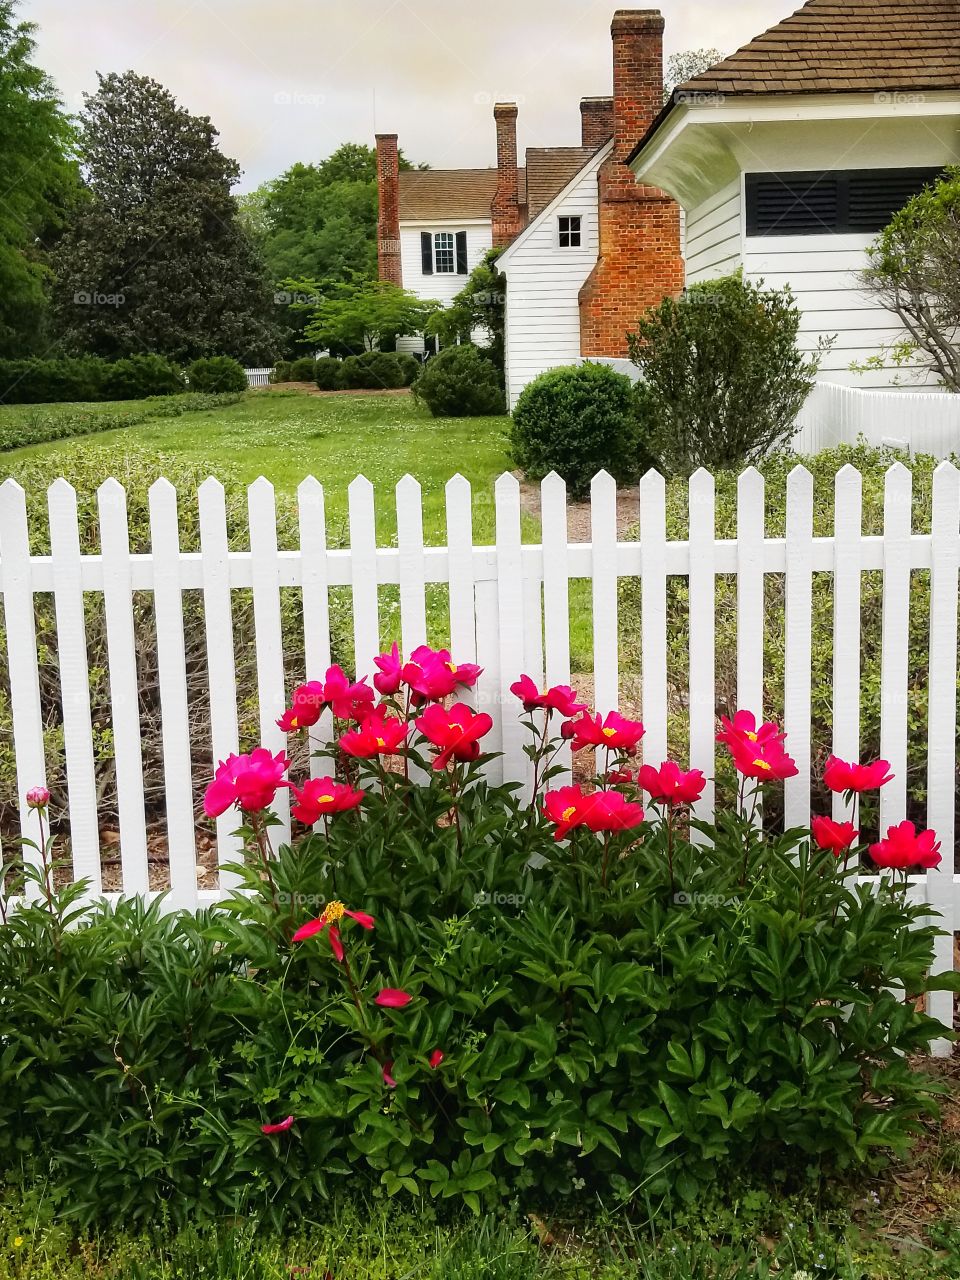 Flowers and a Fence